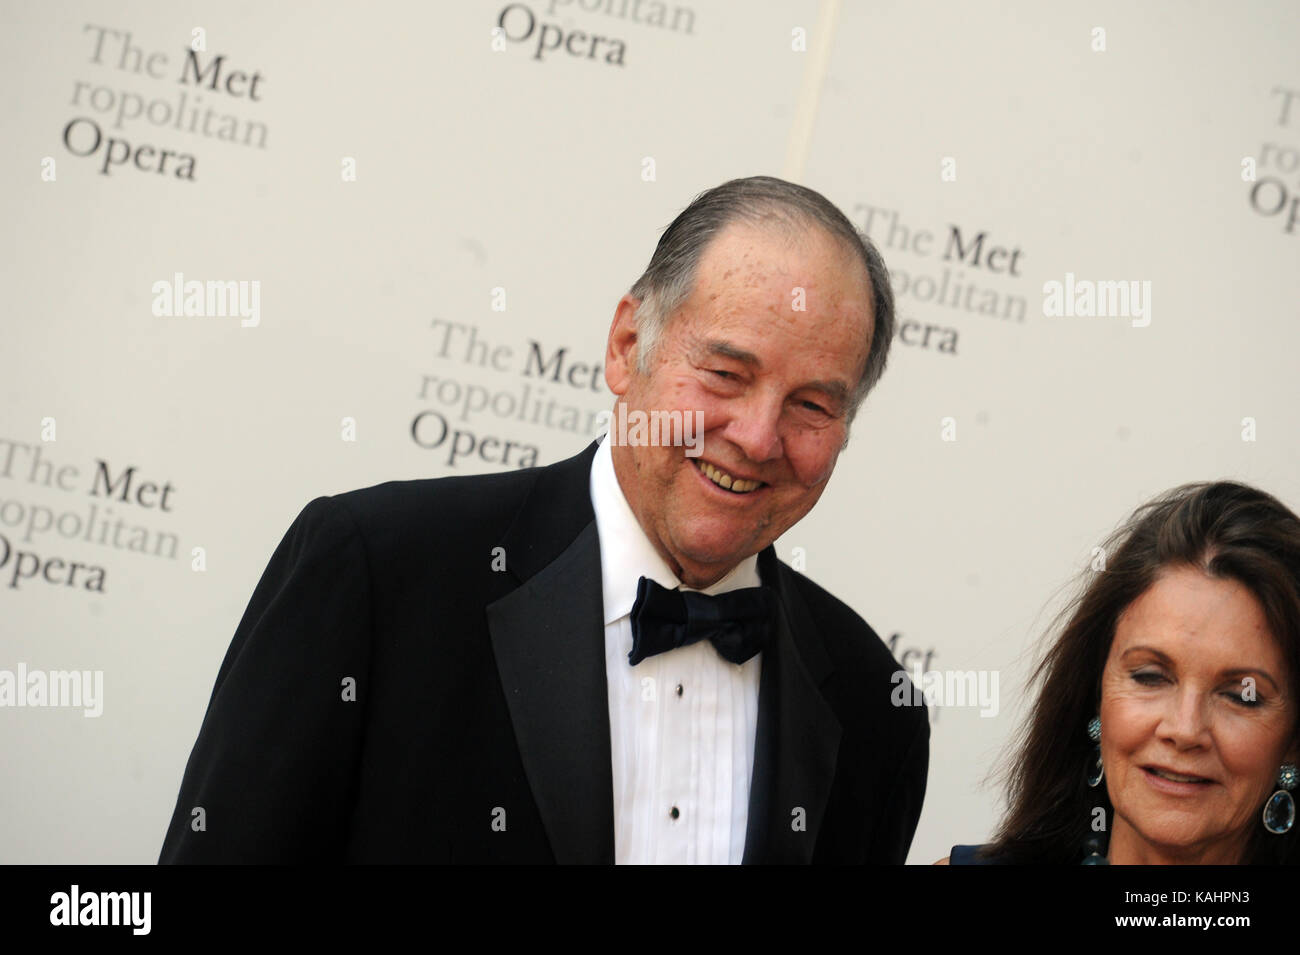 New York, NY, USA. 25th Sep, 2017. Thomas Kean, Susan Braddock attends Metropolitan Opera Opening Night Gala at Lincoln Center on September 25, 2017 in New York City. People: Thomas Kean, Susan Braddock Transmission Ref: MNC1 Must call if interested Michael Storms Storms Media Group Inc. 305-632-3400 - Cell 305-513-5783 - Fax MikeStorm Credit: Aol.Com Www.Storms Media Group.Com/Alamy Live News Stock Photo